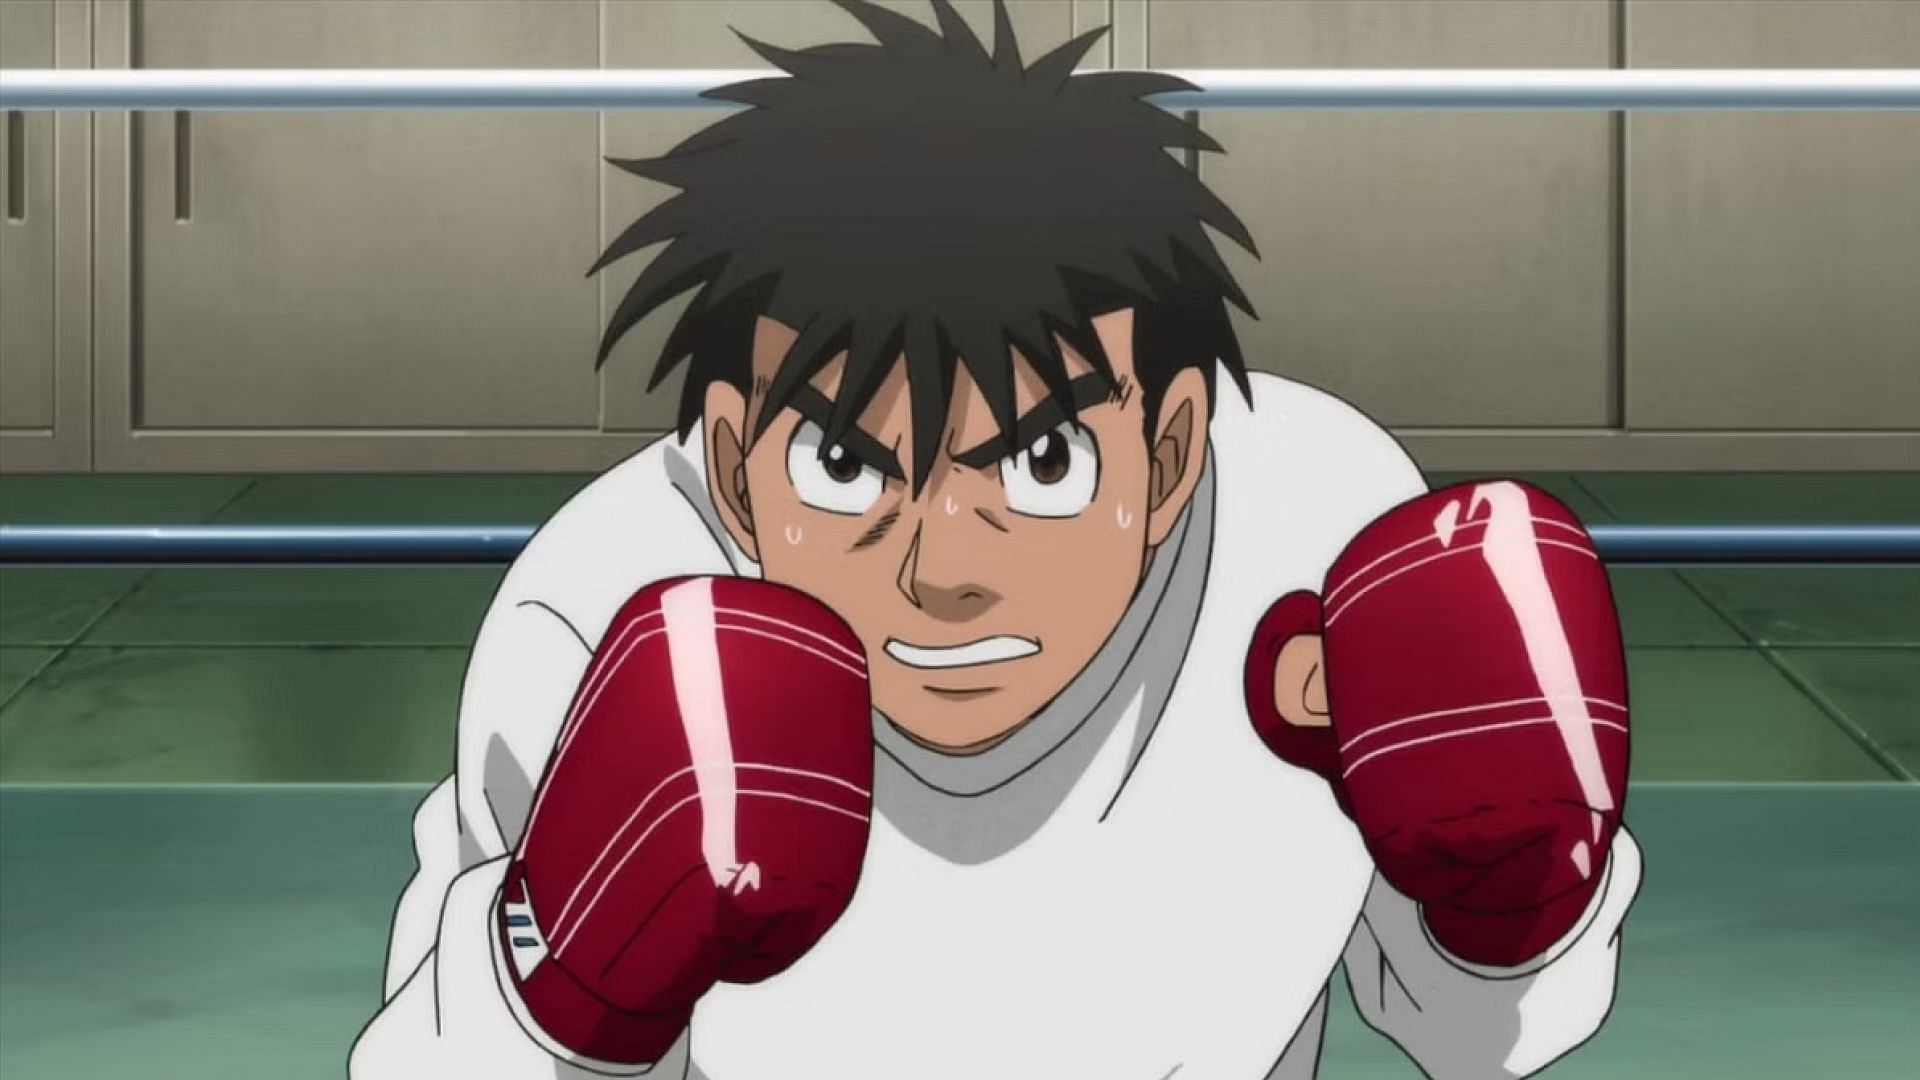 Ippo is among the most renowned sports anime characters (Image via MadHouse Studio)